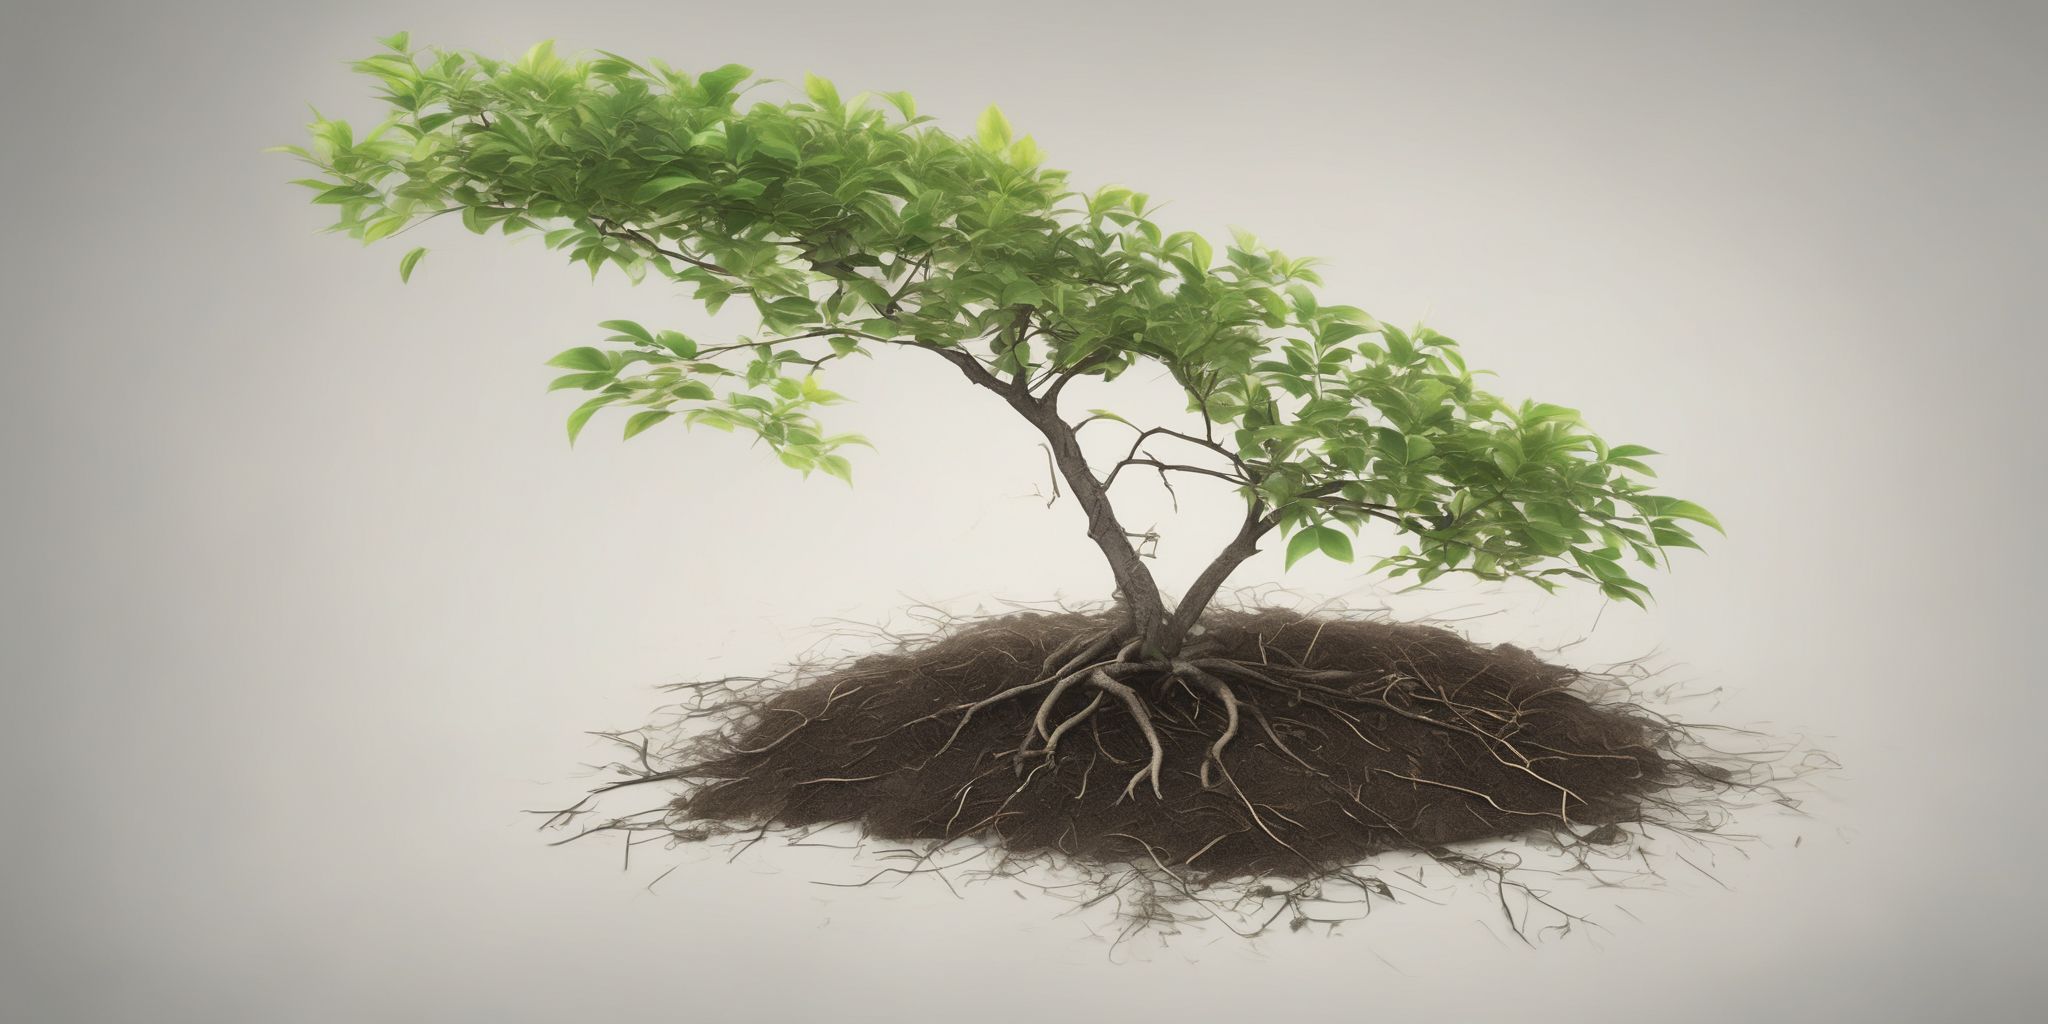 Sapling  in realistic, photographic style